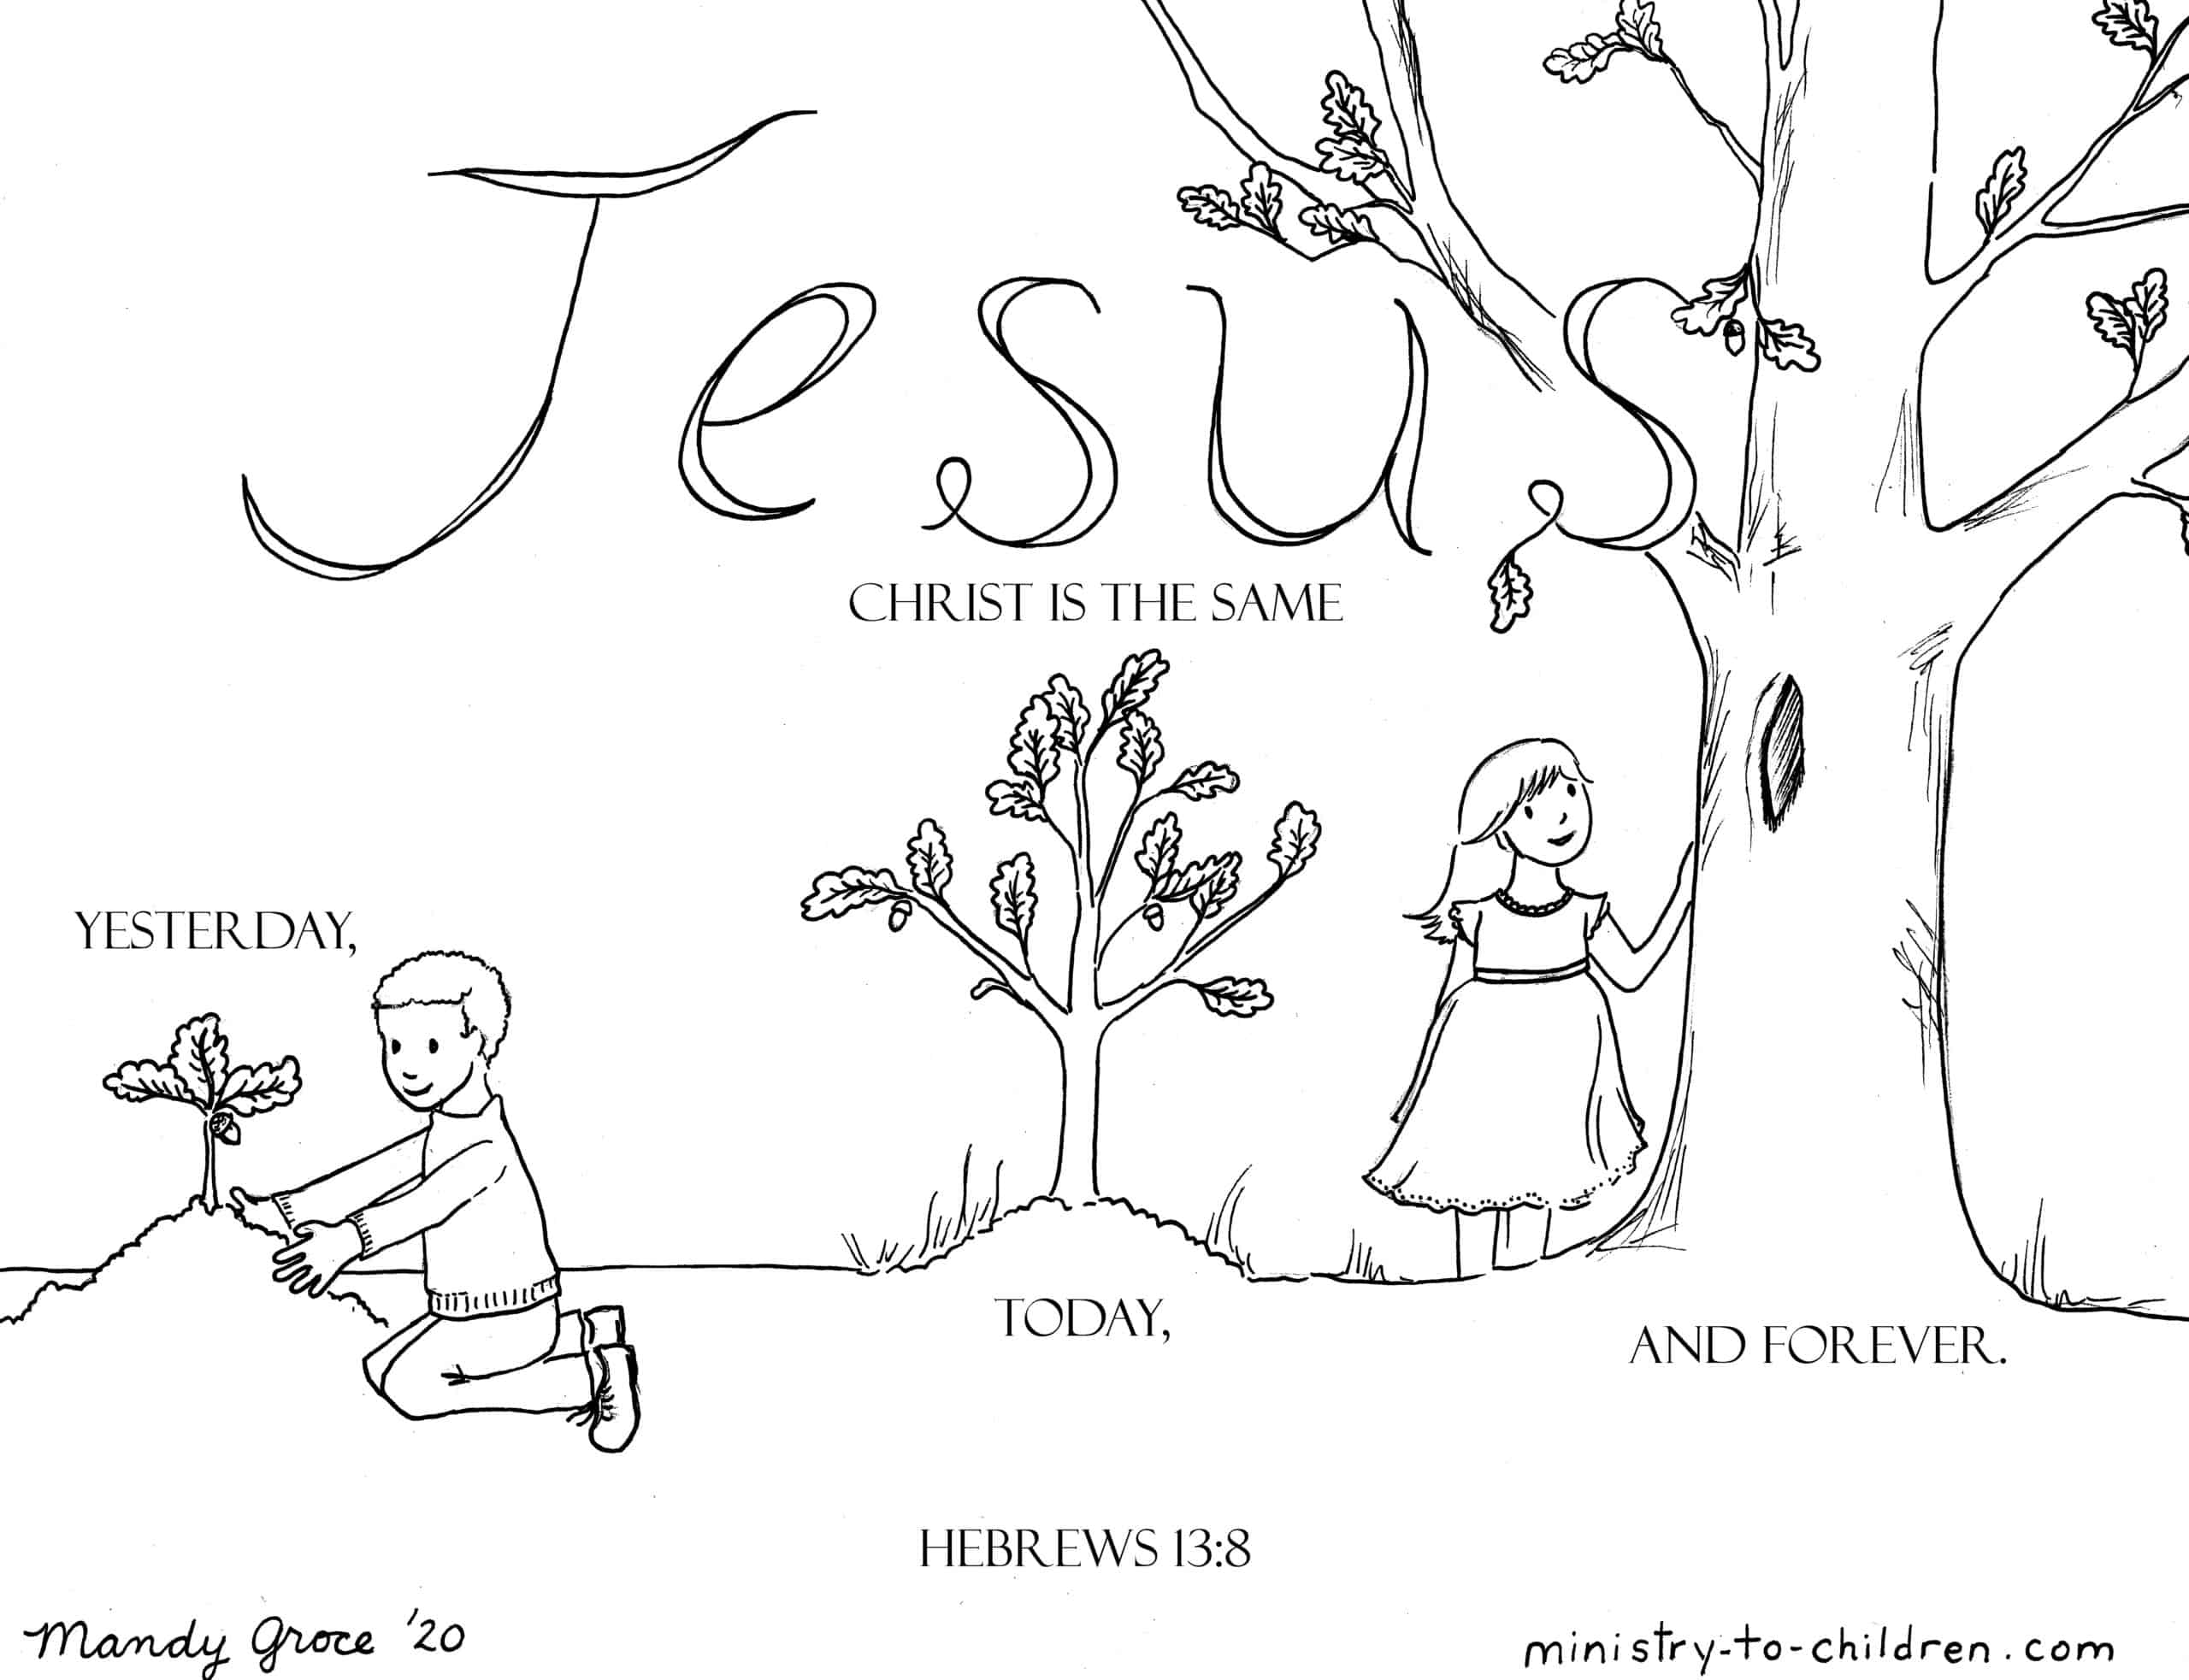 Coloring page jesus christ is the same yesterday and today and forever hebrews